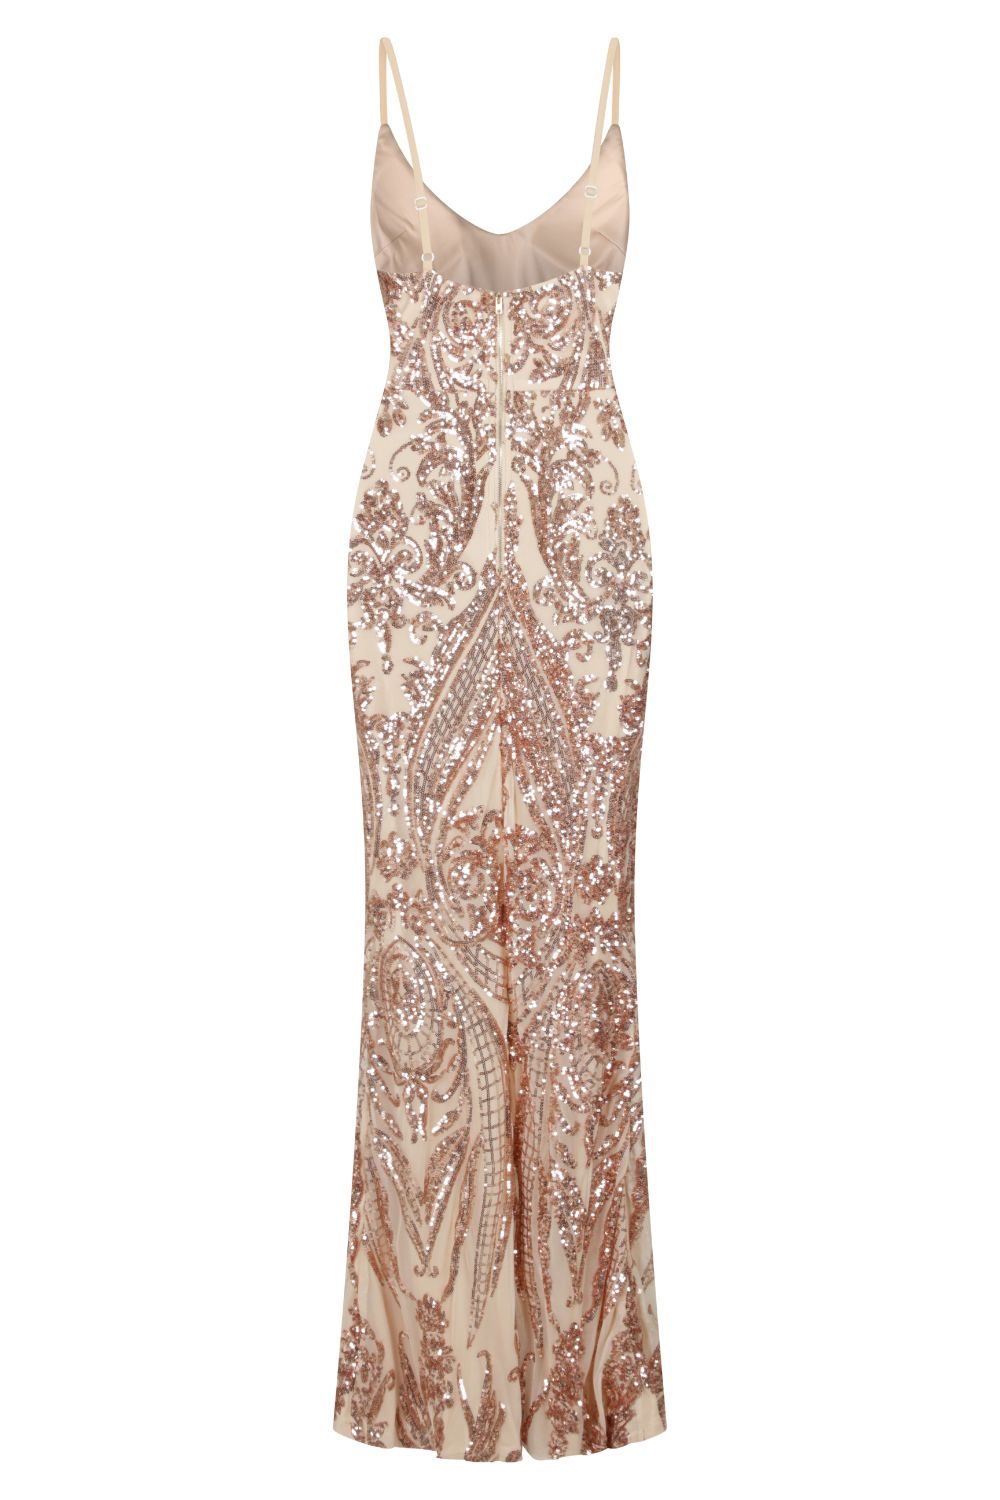 Outshine Vip Rose Gold Nude Sequin Illusion Slit Maxi Dress